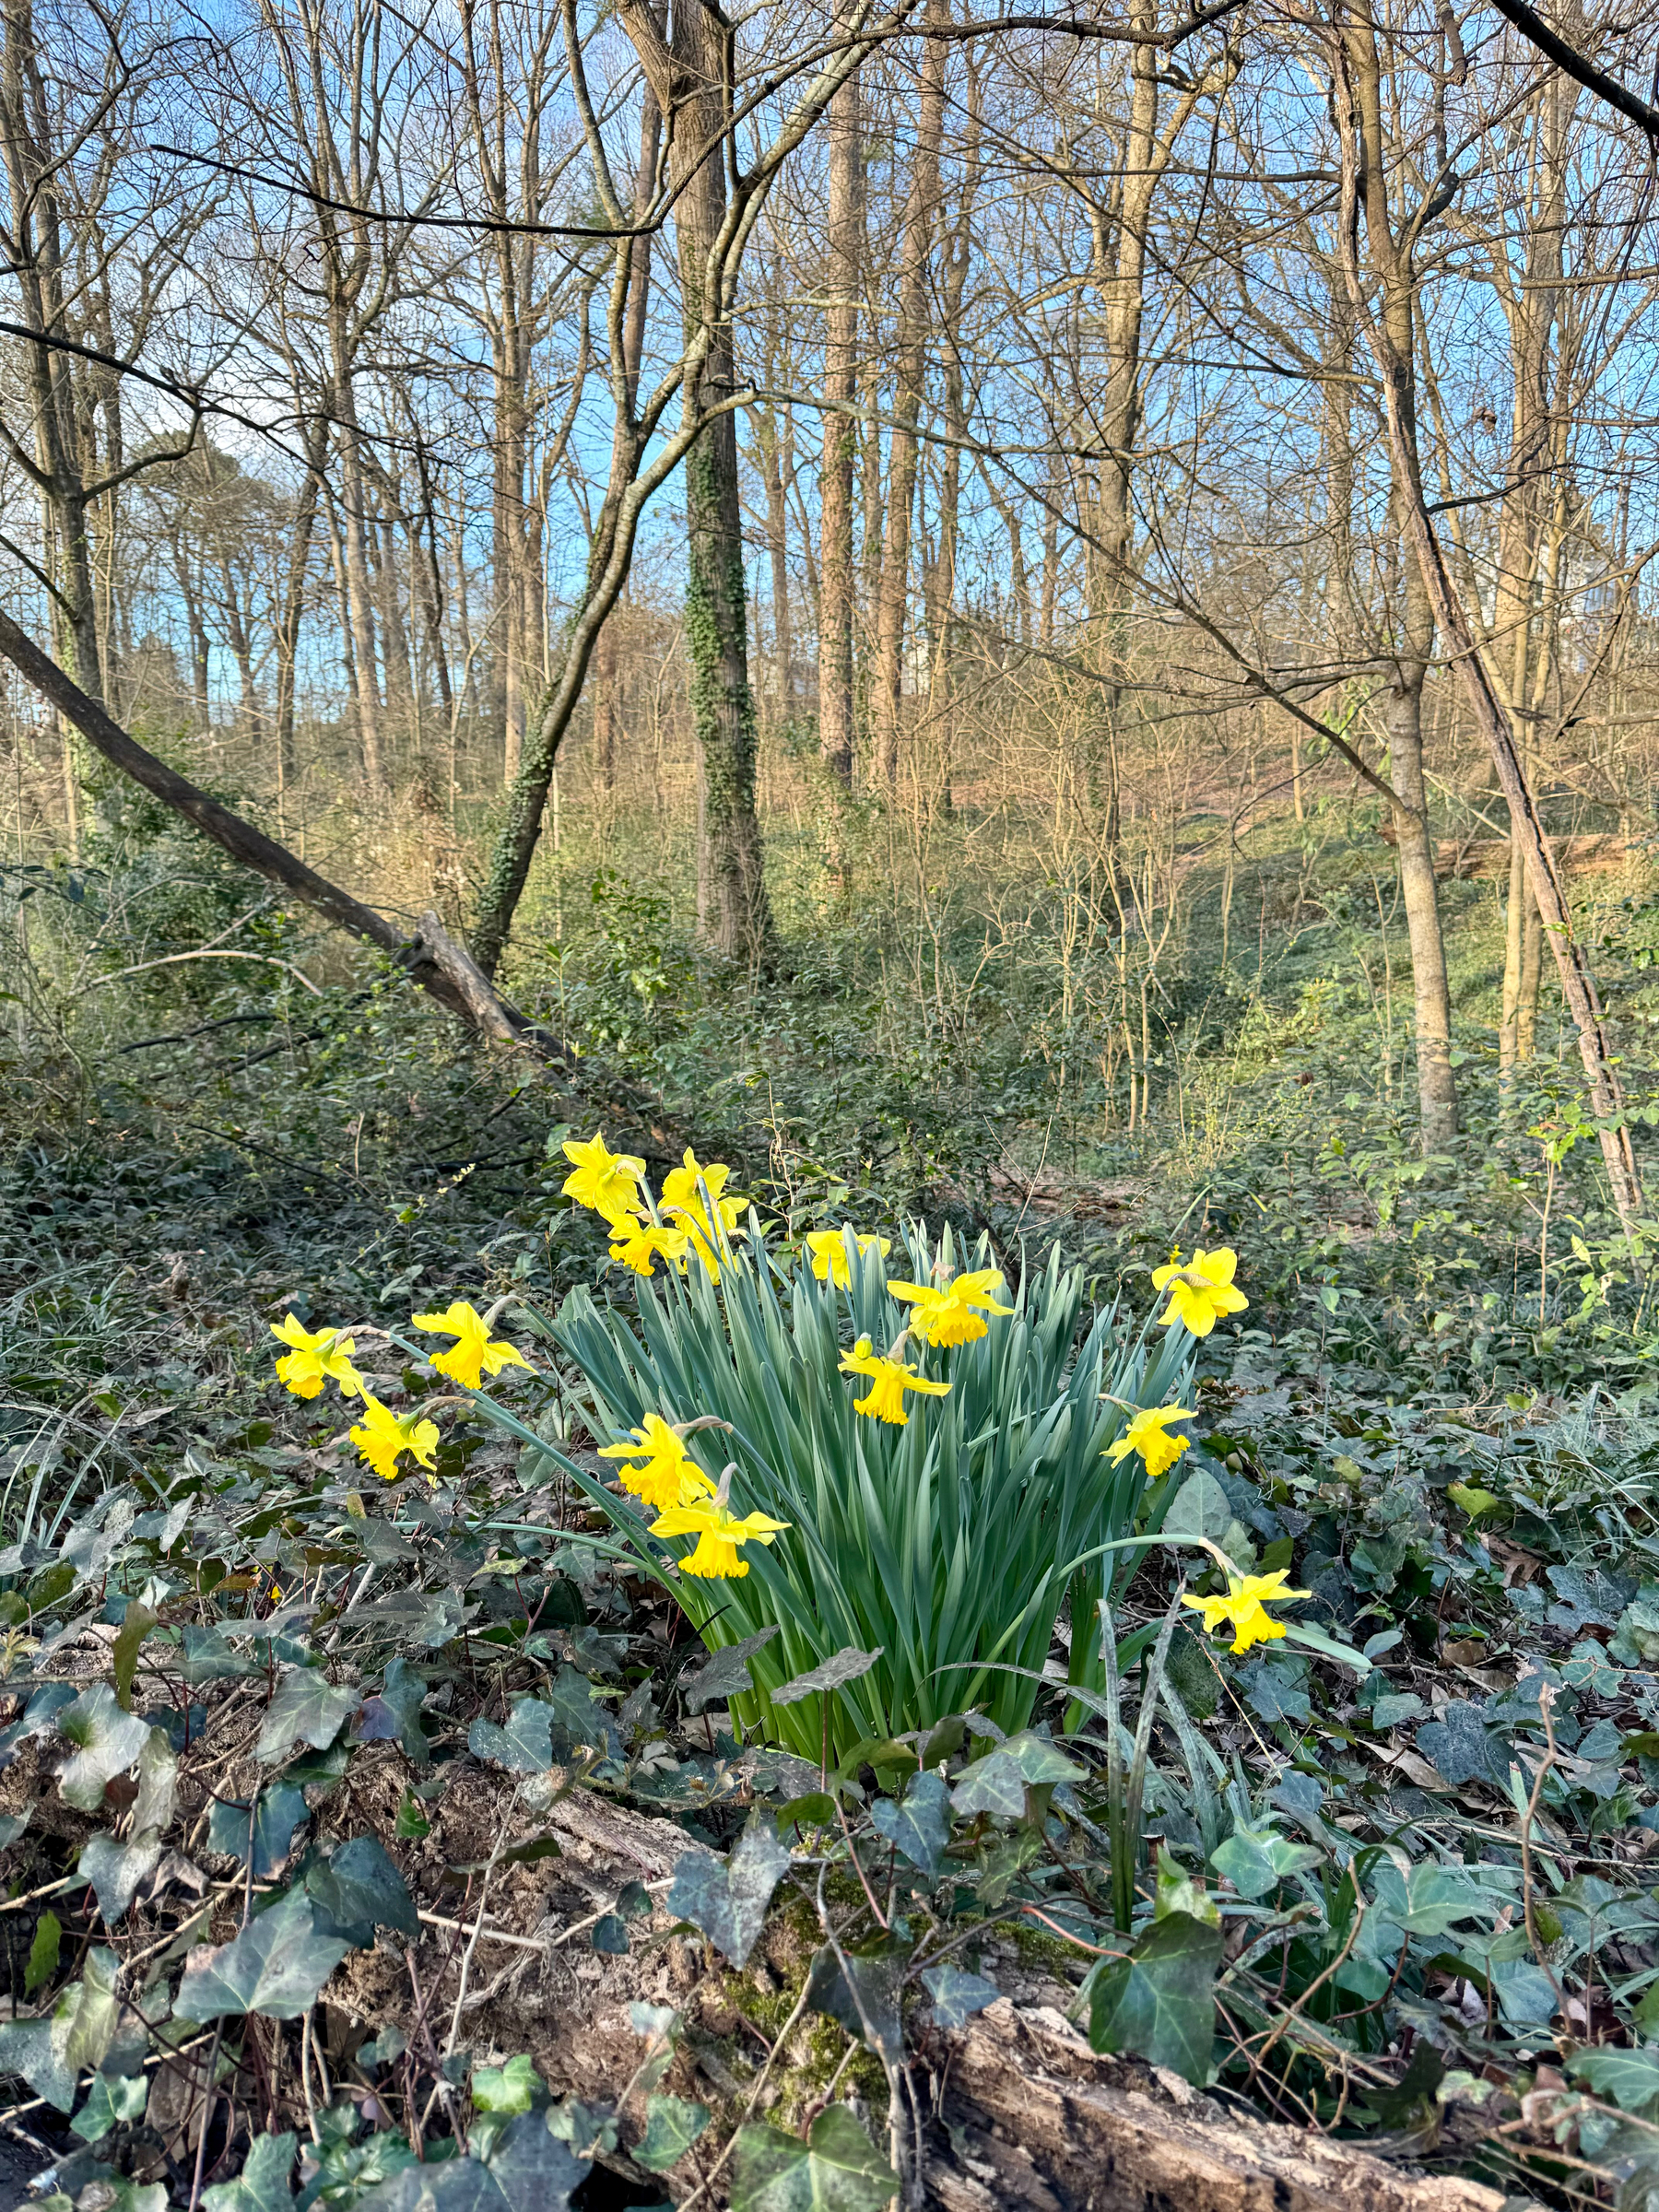 A cluster of daffodils in full bloom in a woodland setting, with leafless trees and ivy-covered ground in the background.